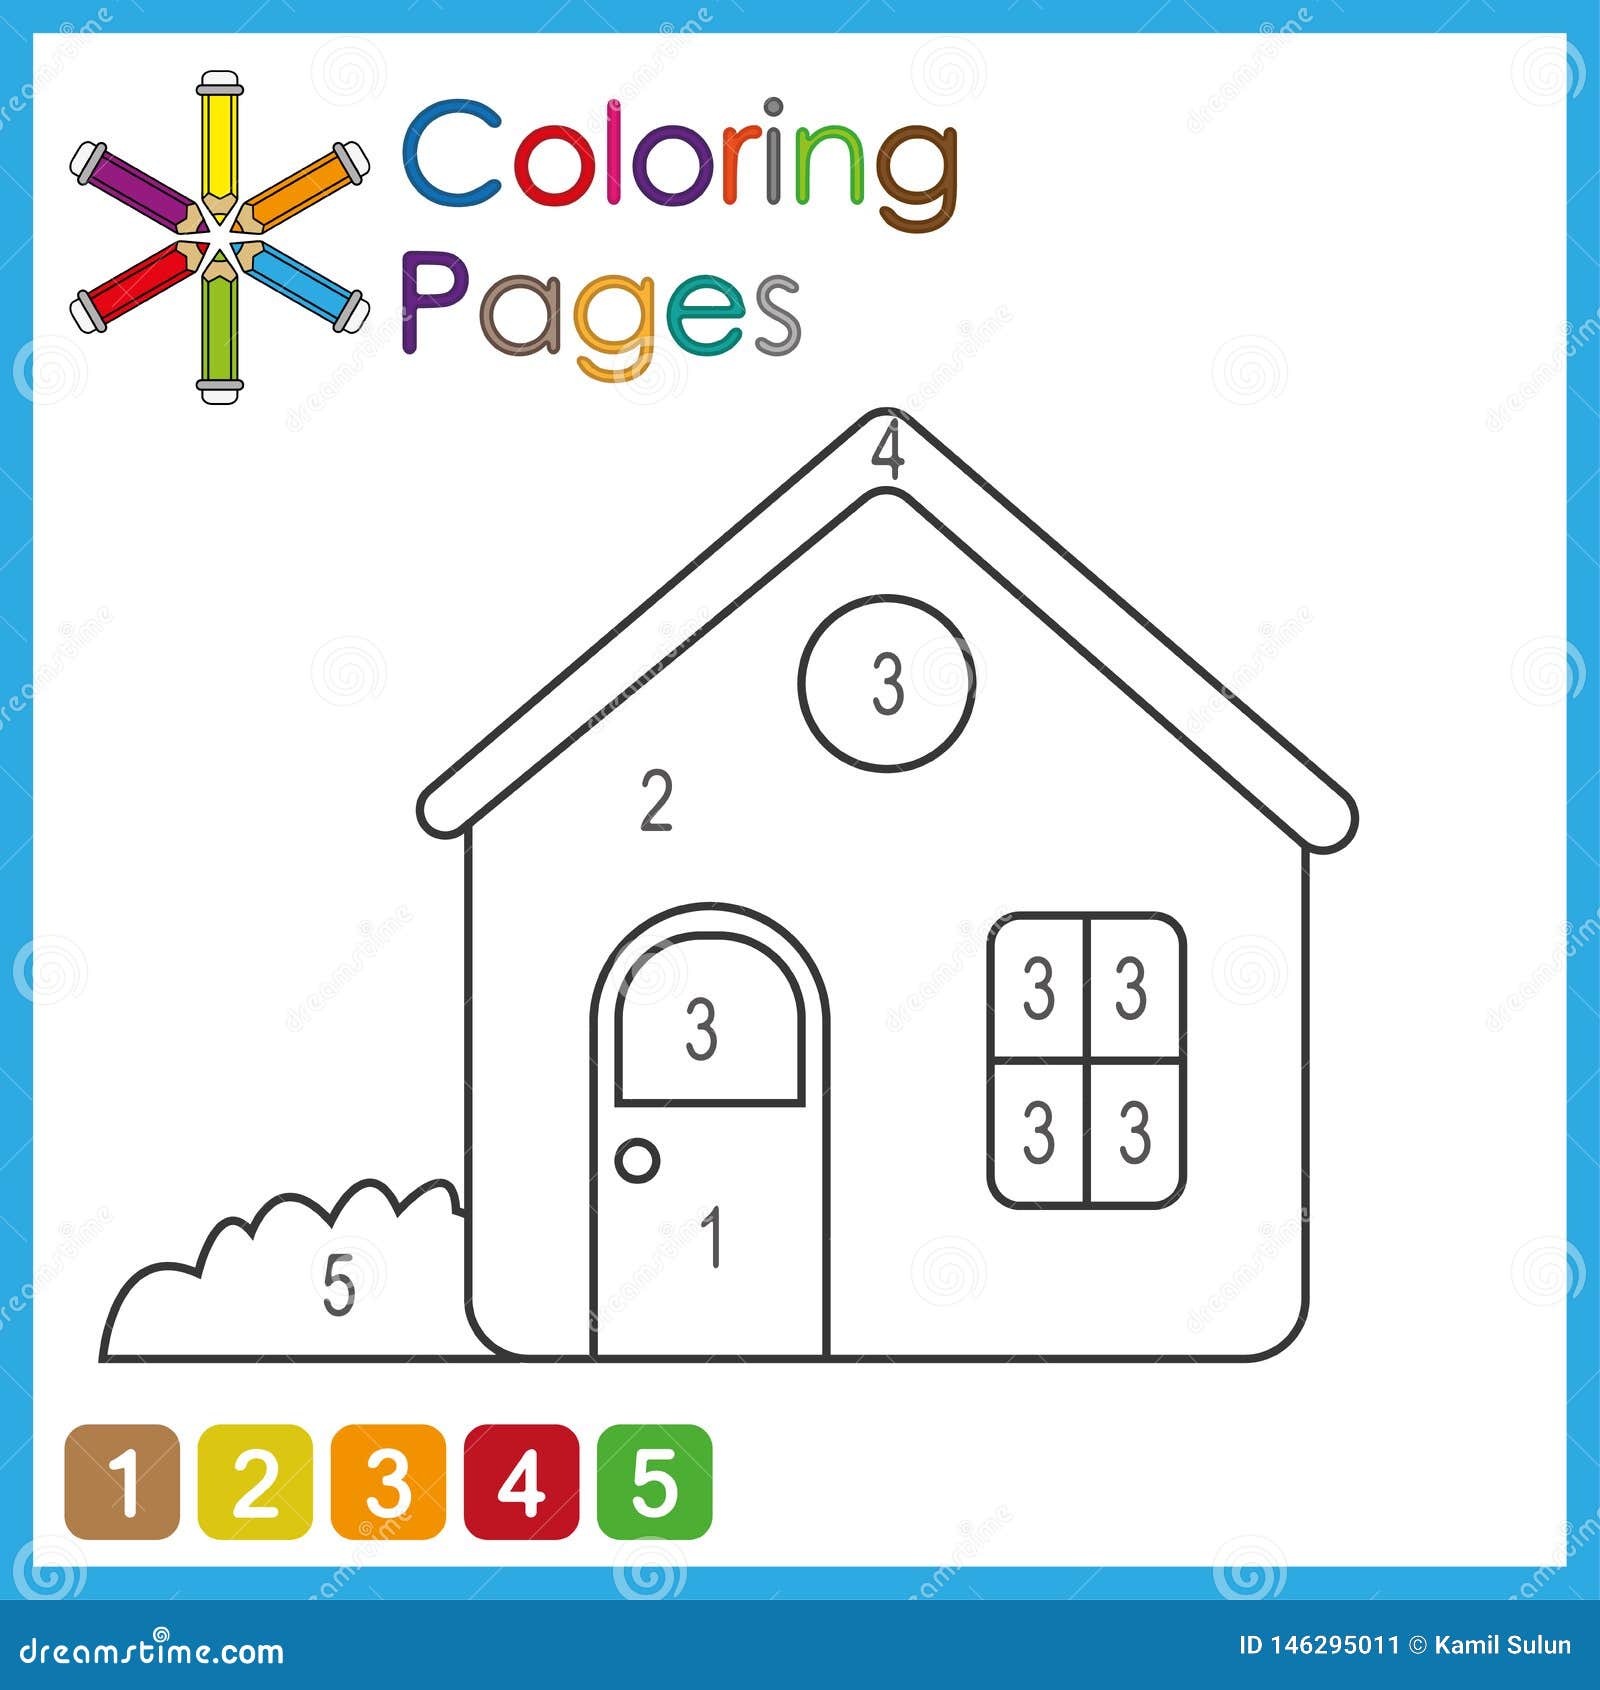 Coloring Page for Kids, Color the Parts of the Object According To